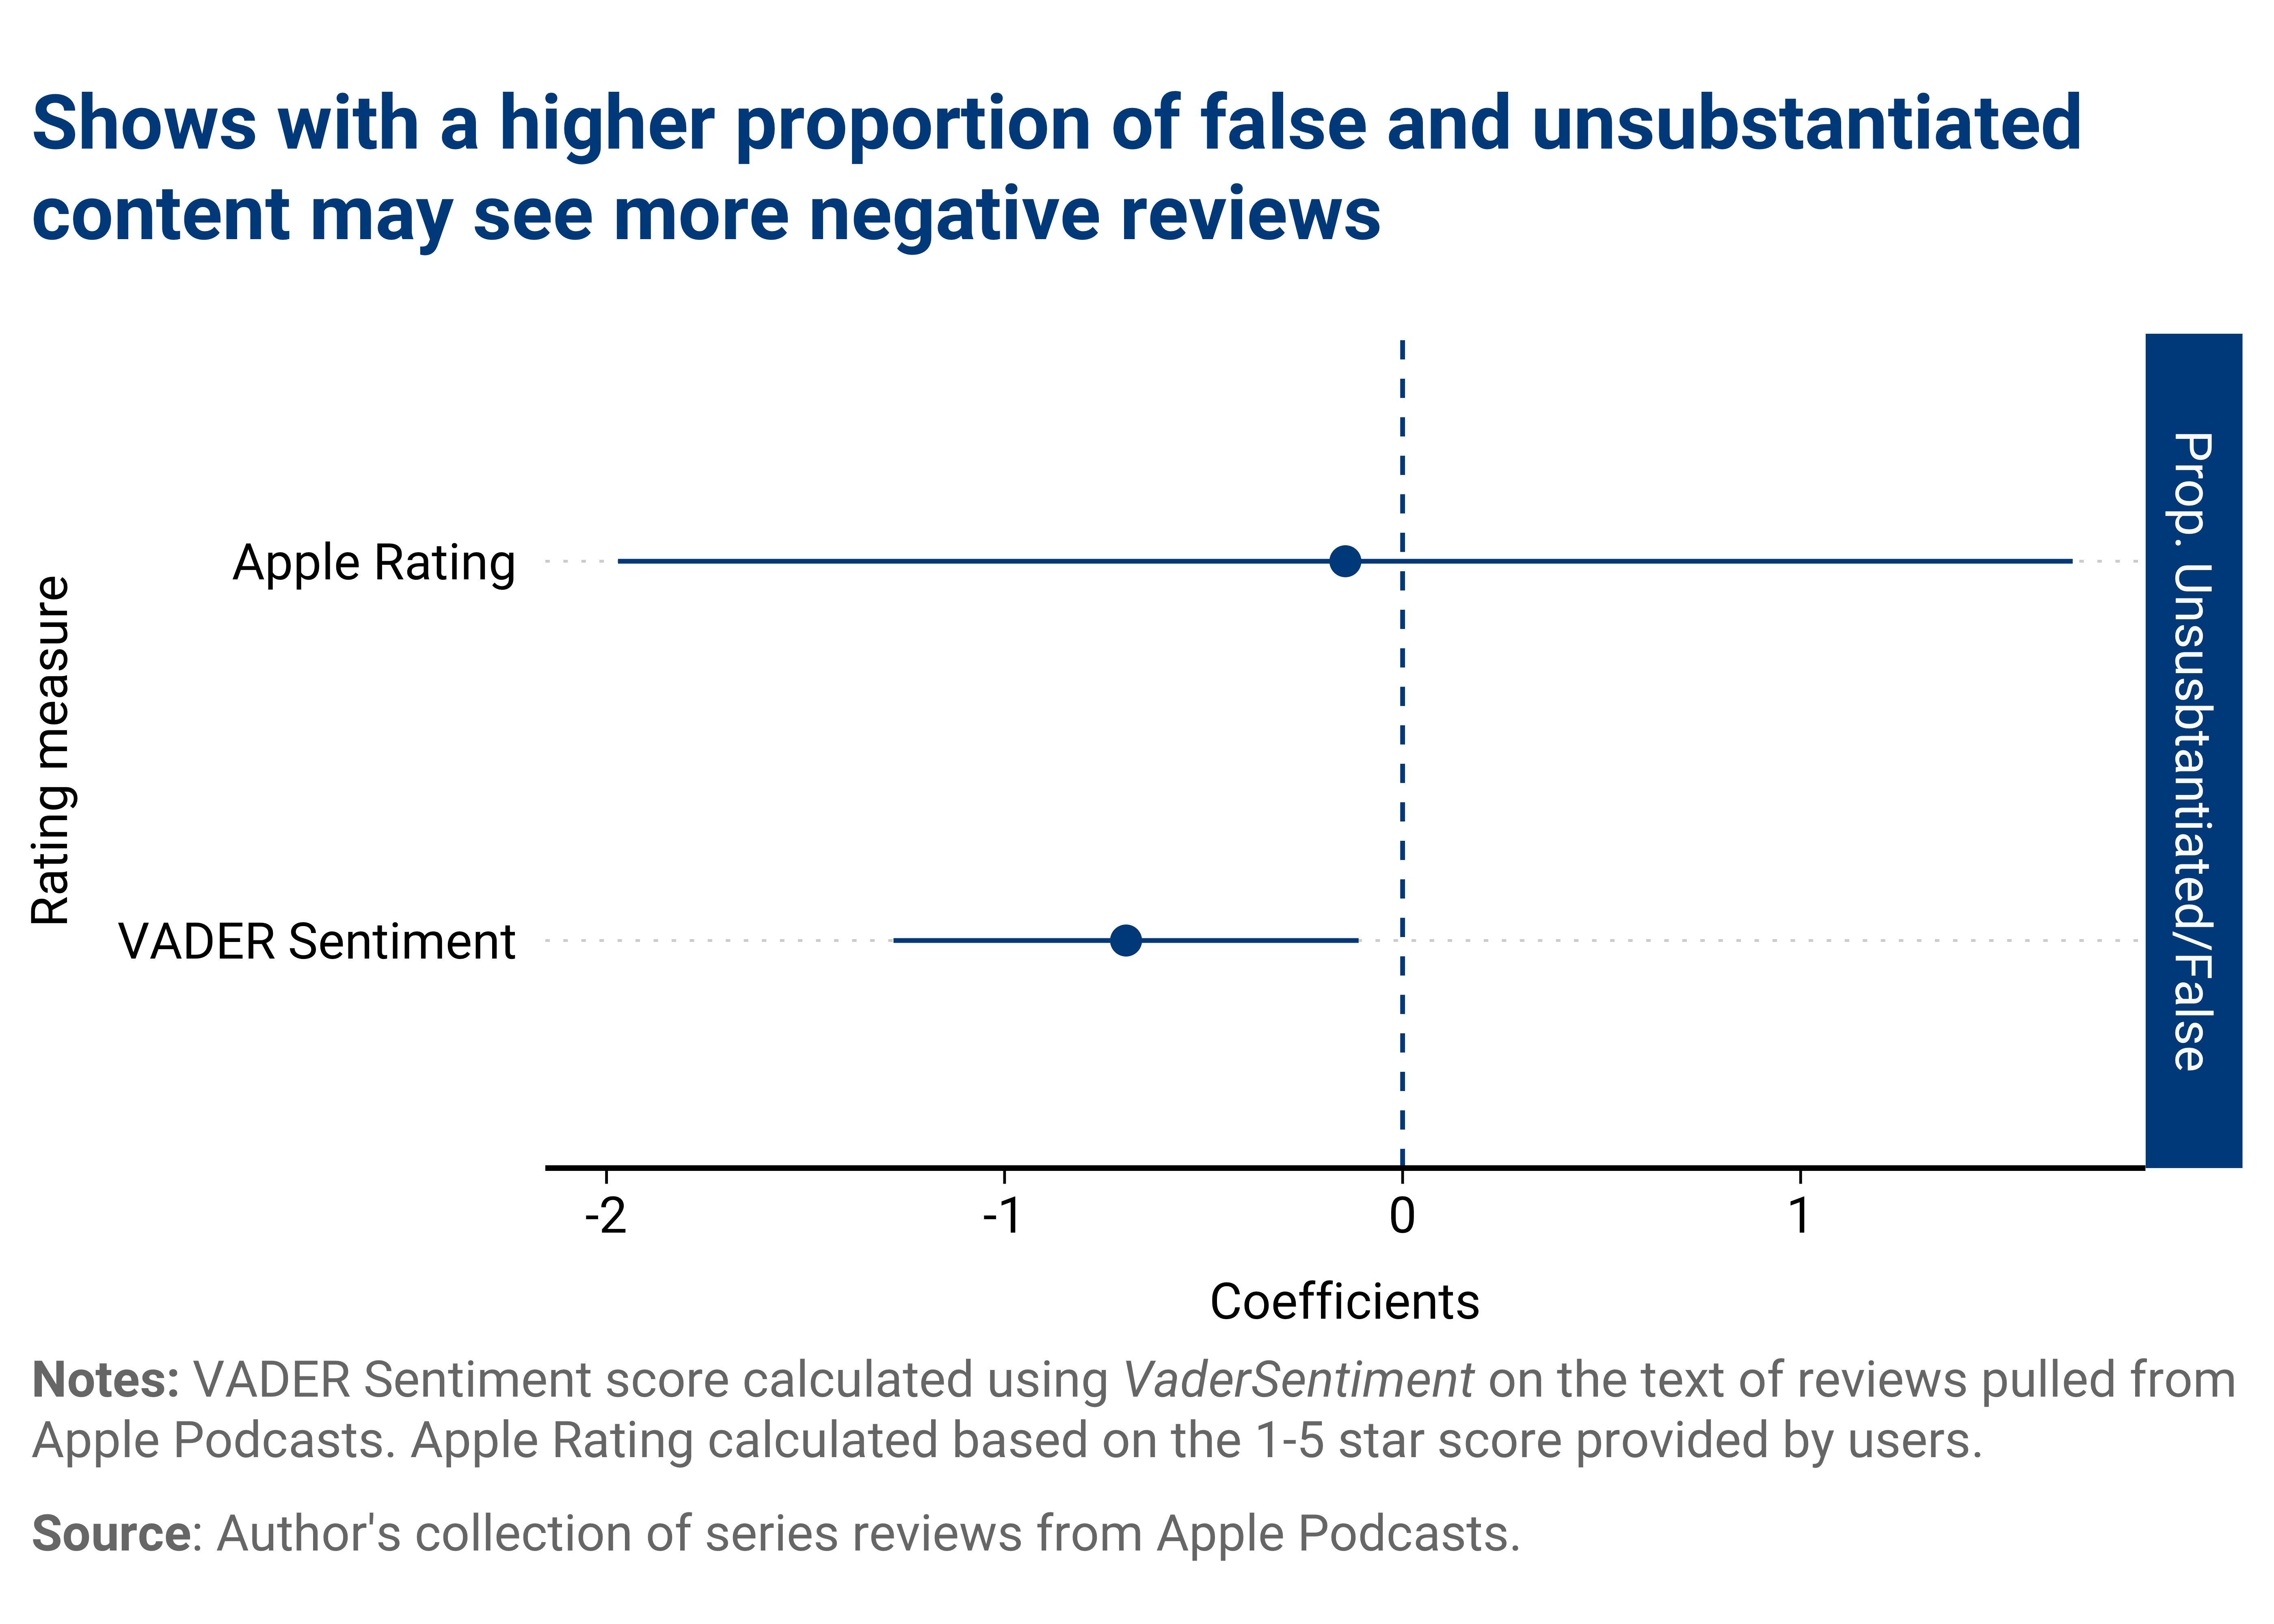 Figure: While the VADER method shows an association between the proportion of episodes sharing false or unsubstantiated content and more negative reviewer sentiment (i.e., shows with a higher proportion of content sharing false and unsubstantiated claims see more negative reviewer comments), using Apple’s score as a measure of reviewer support is inconclusive. 